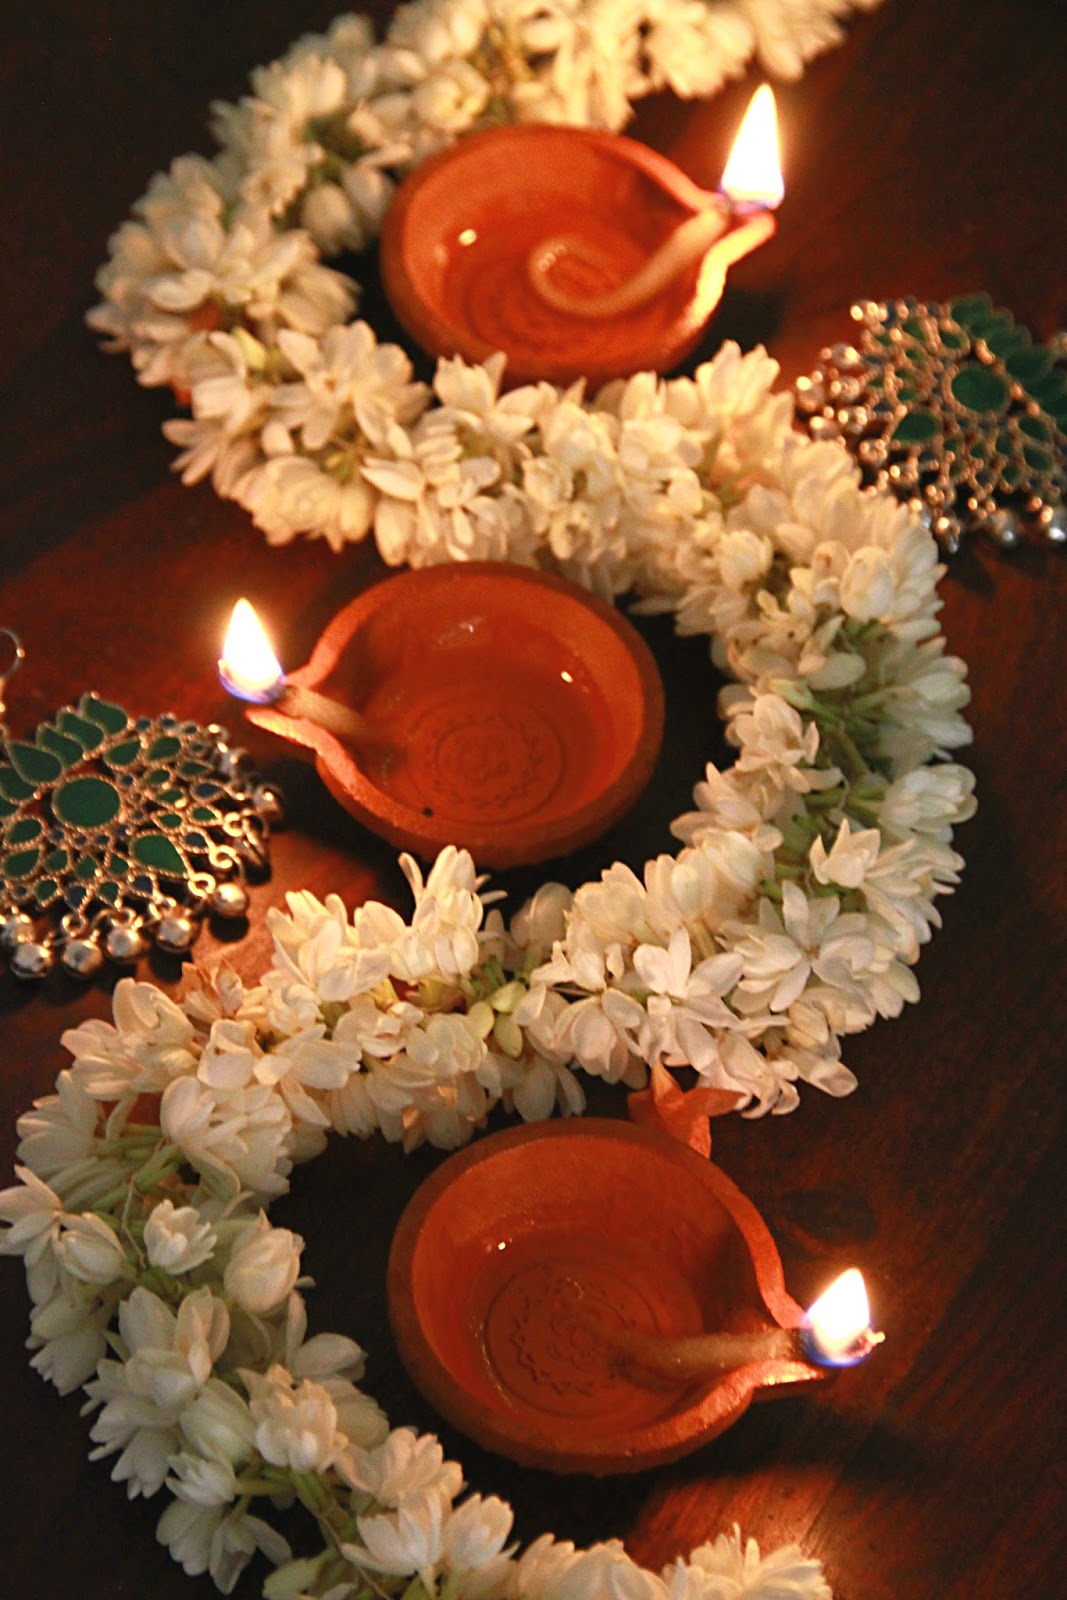 A garland of delicate white jasmine flowers and decorations of green enamel and gold arranged around three lit diyas (oil lamps) made of terracotta